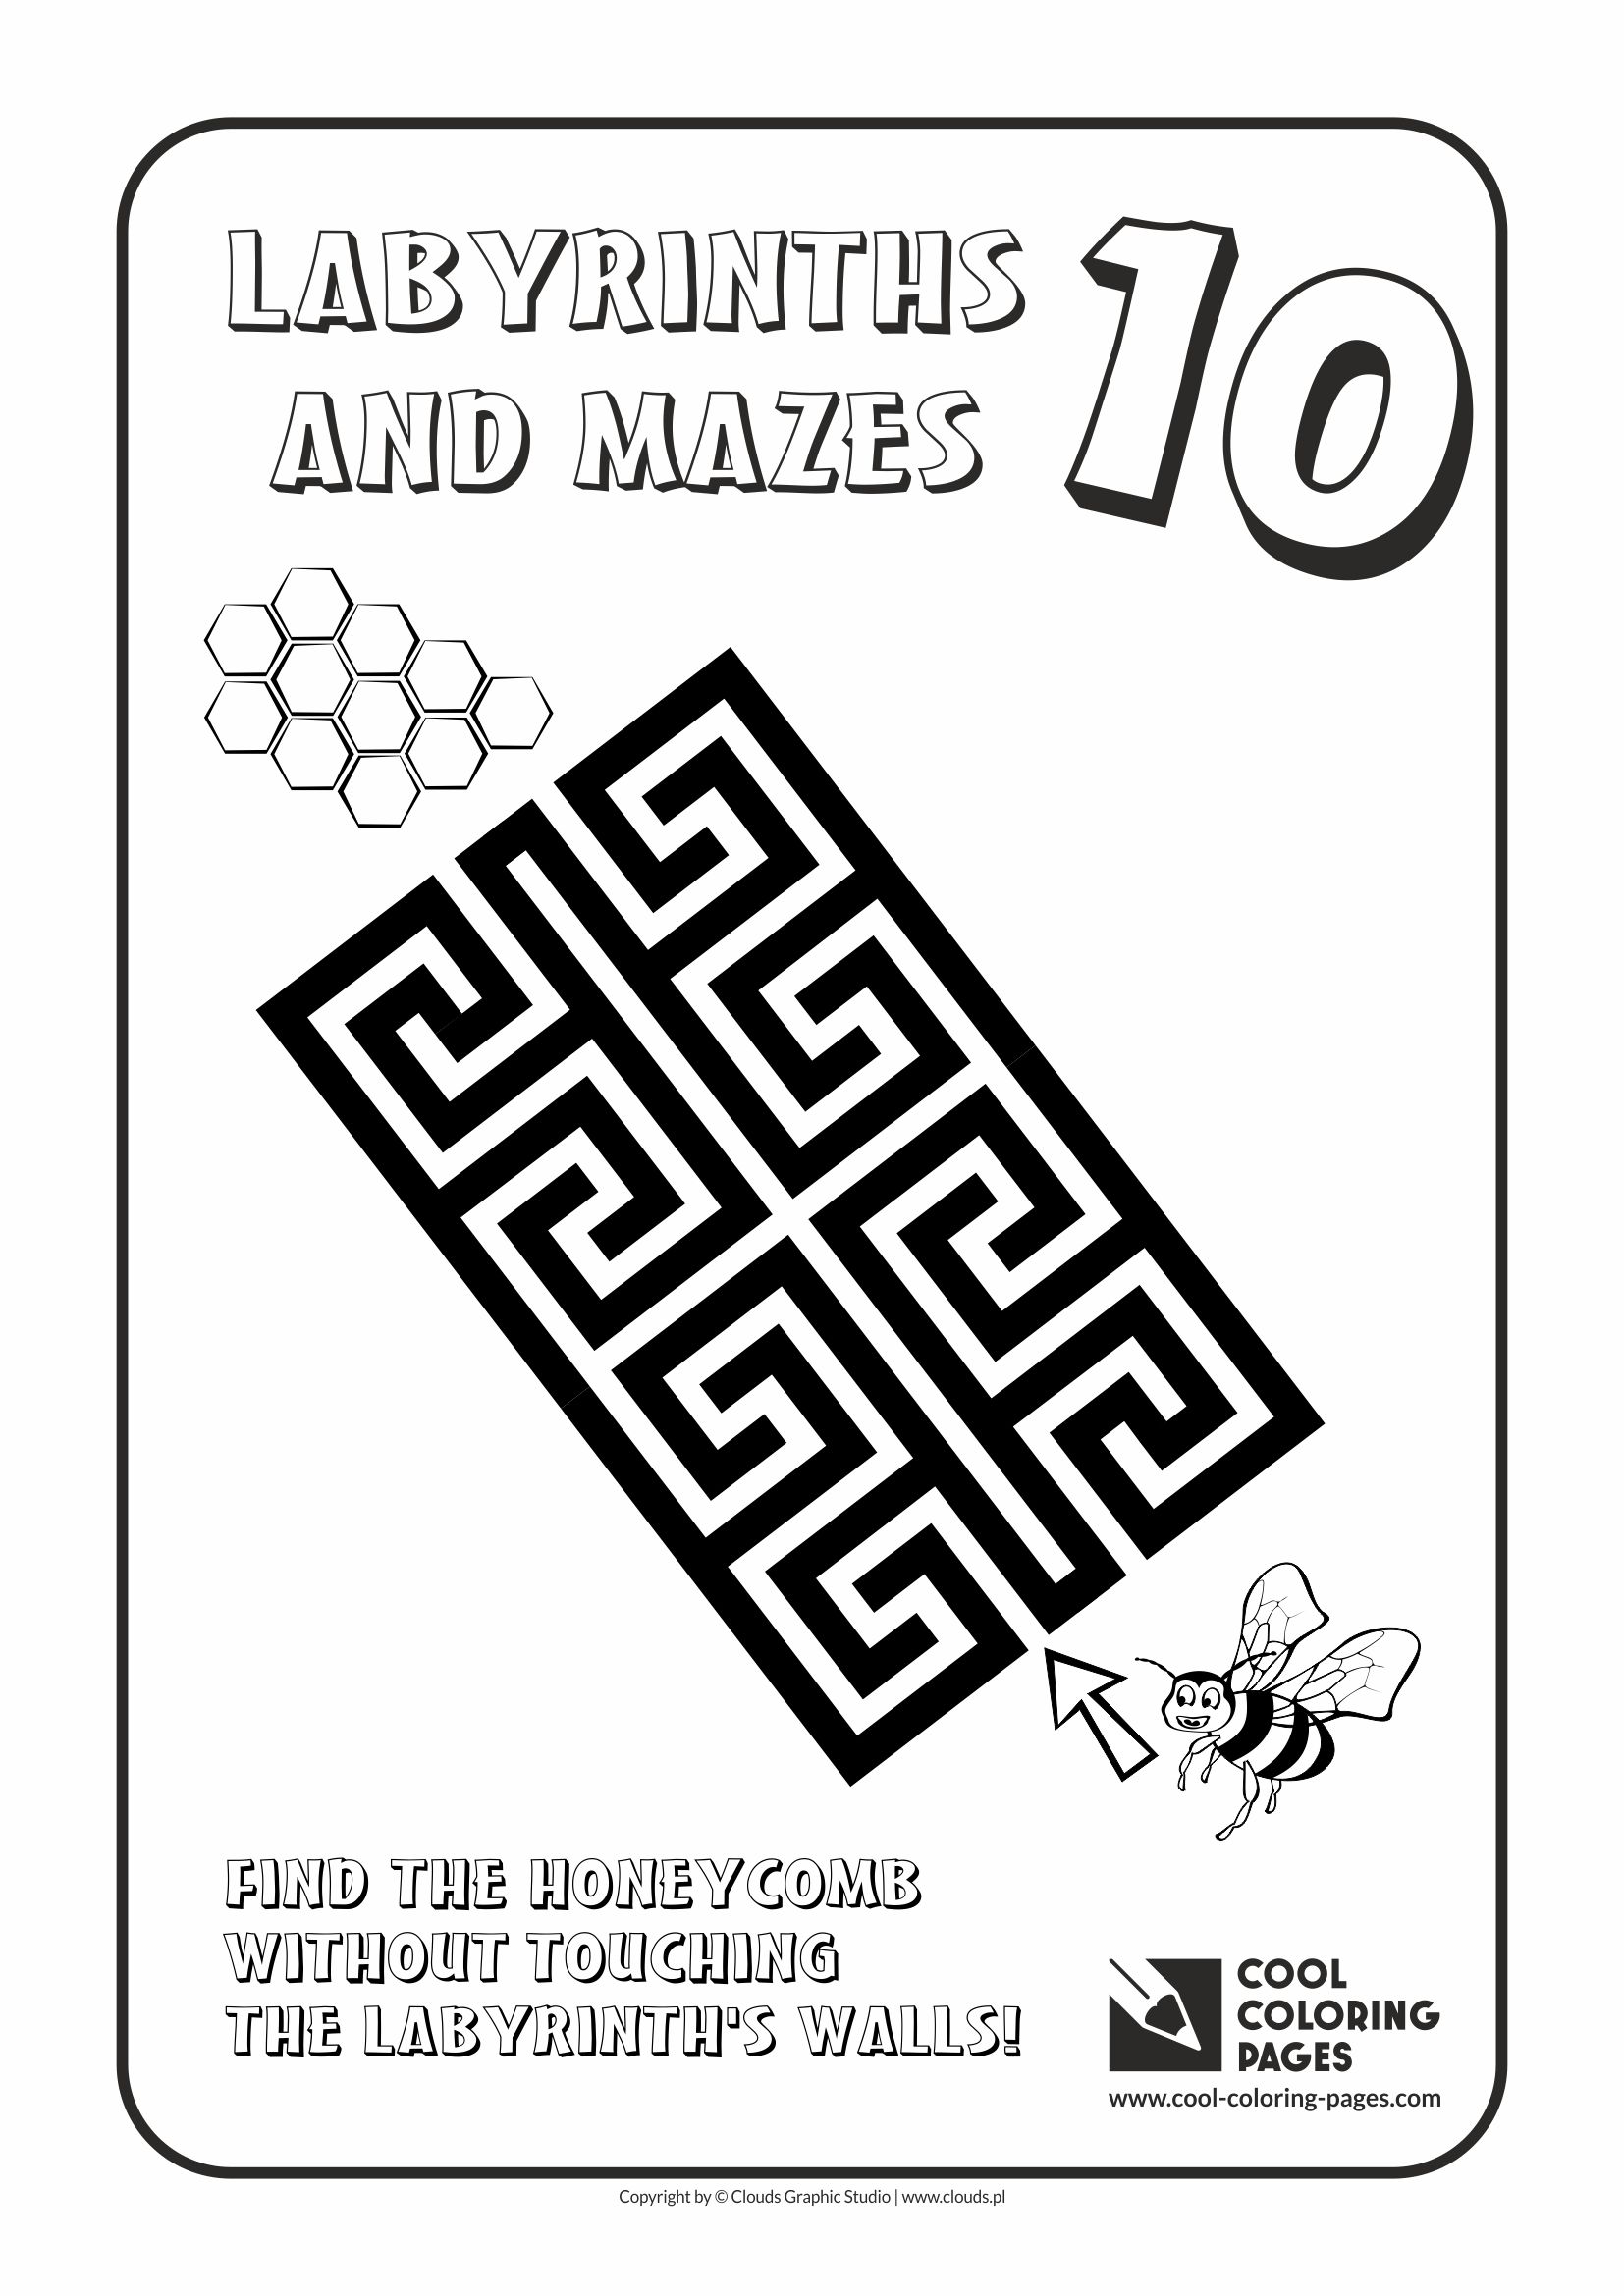 Cool Coloring Pages - Labyrinths and mazes / Maze no 10